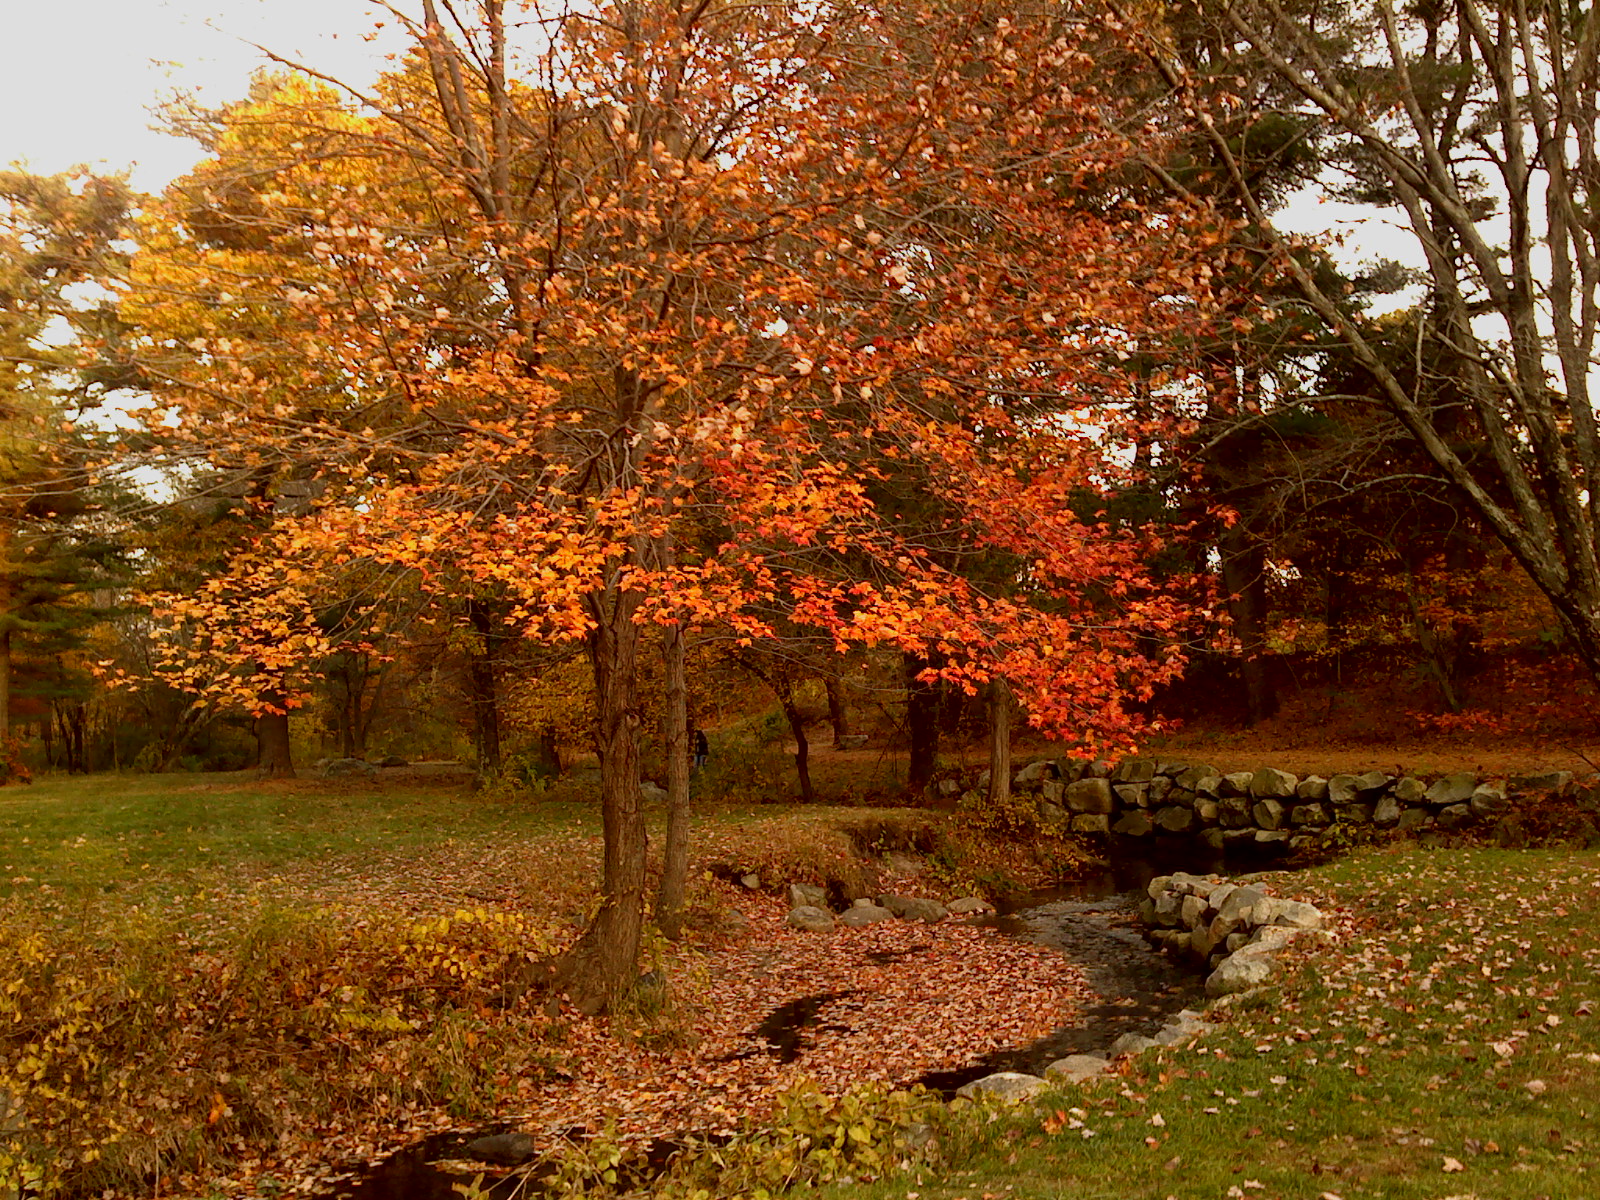 Autum Brook (user submitted)